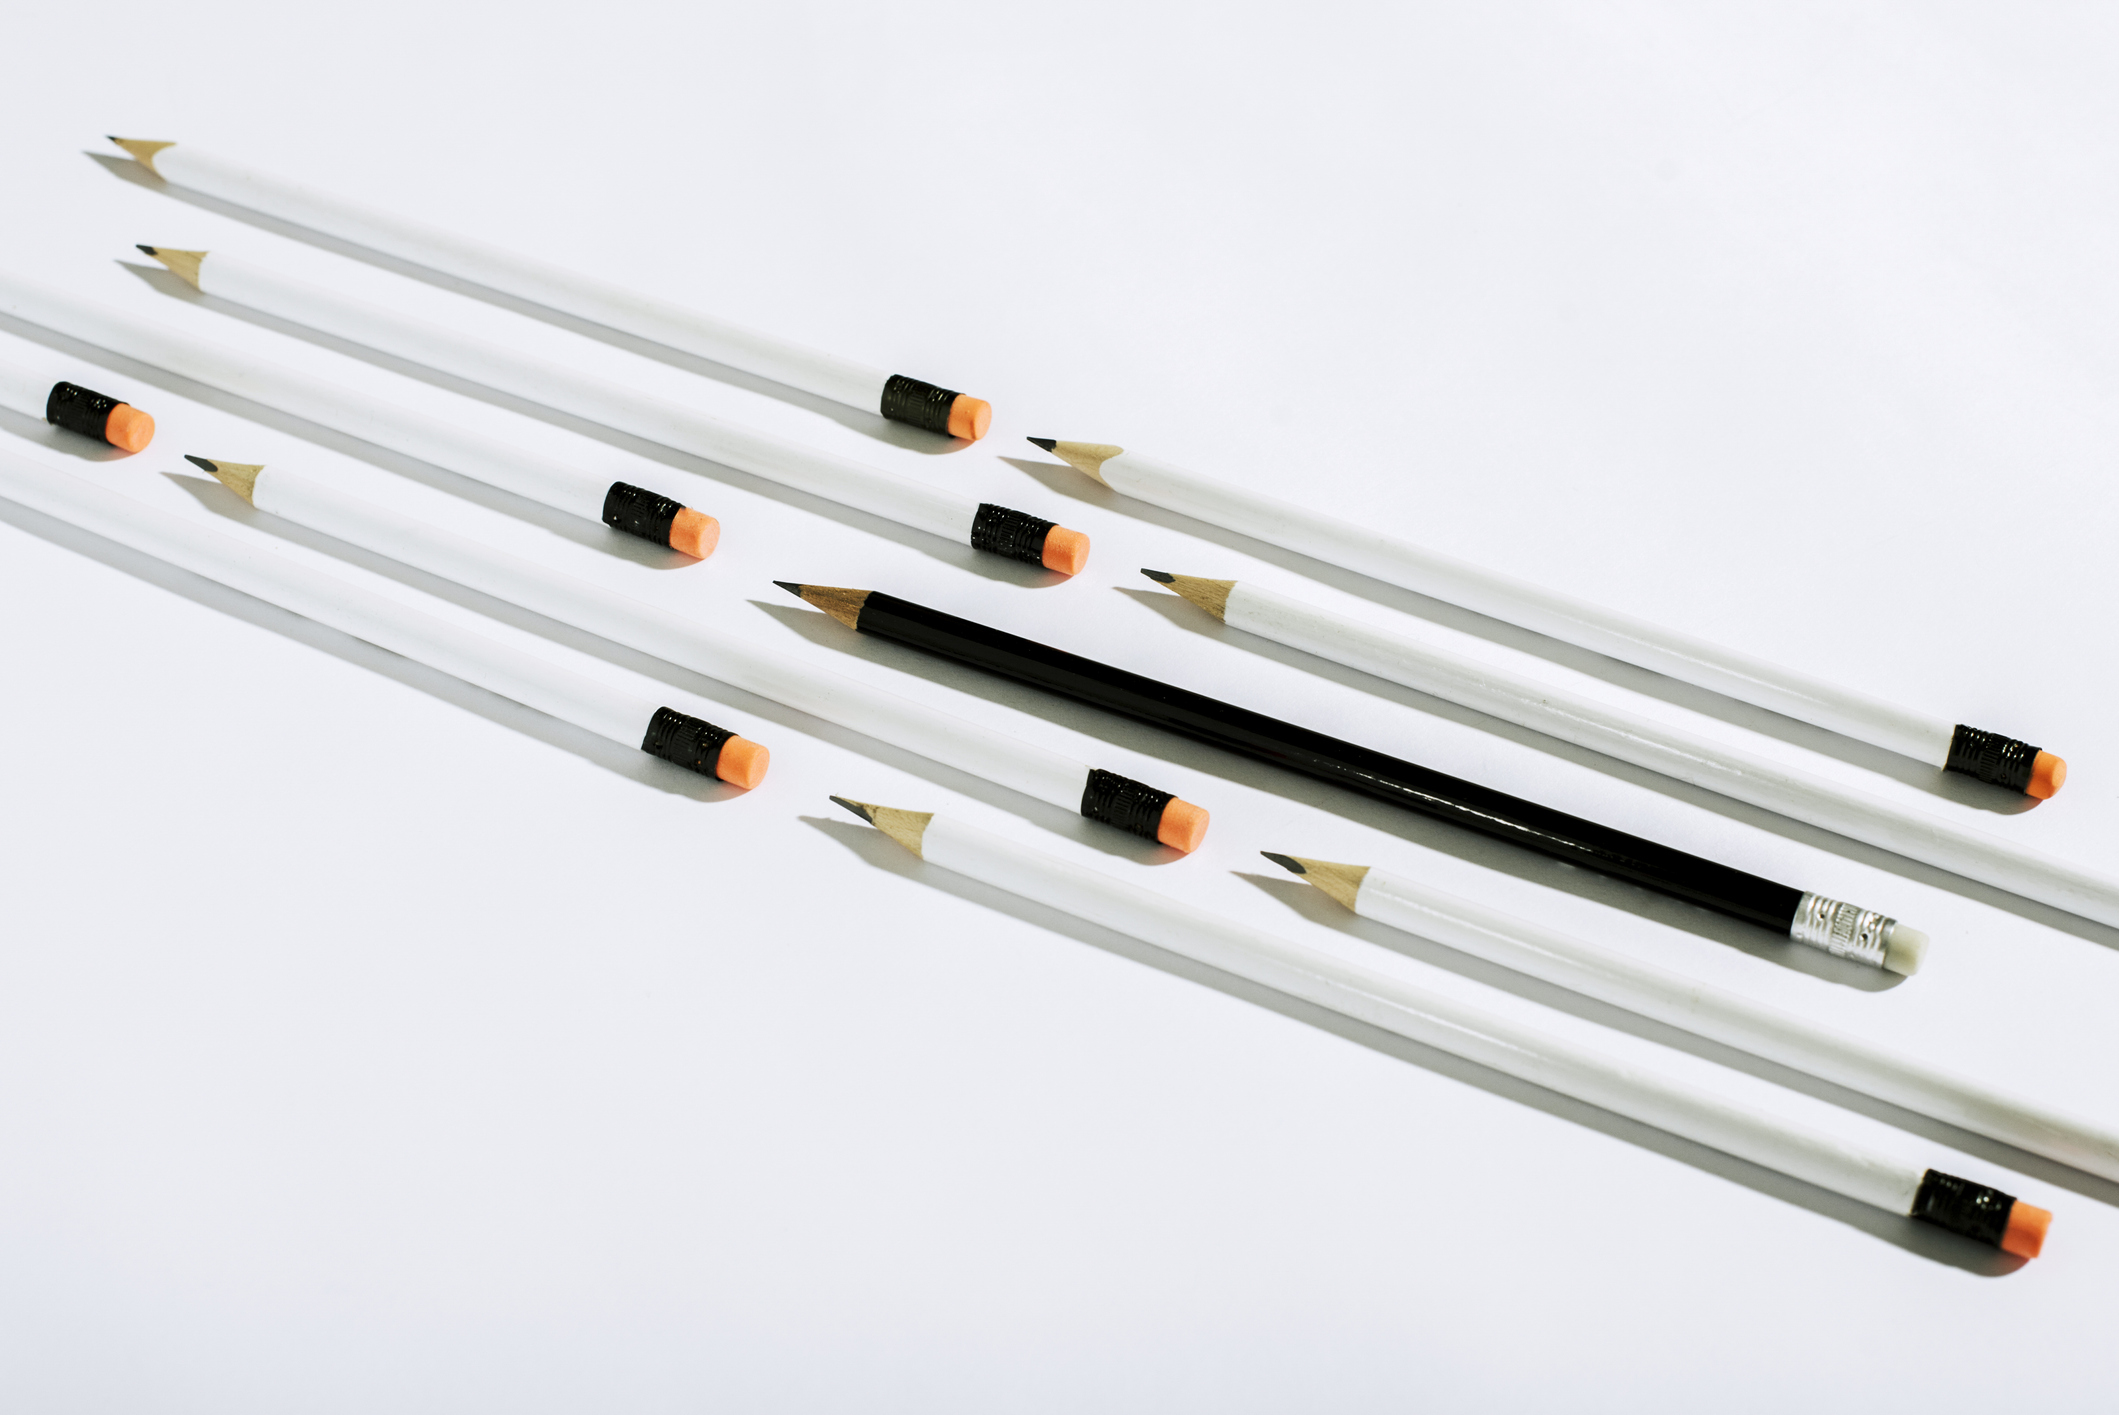 Row of white pencils and one black pencil, lying on a white background